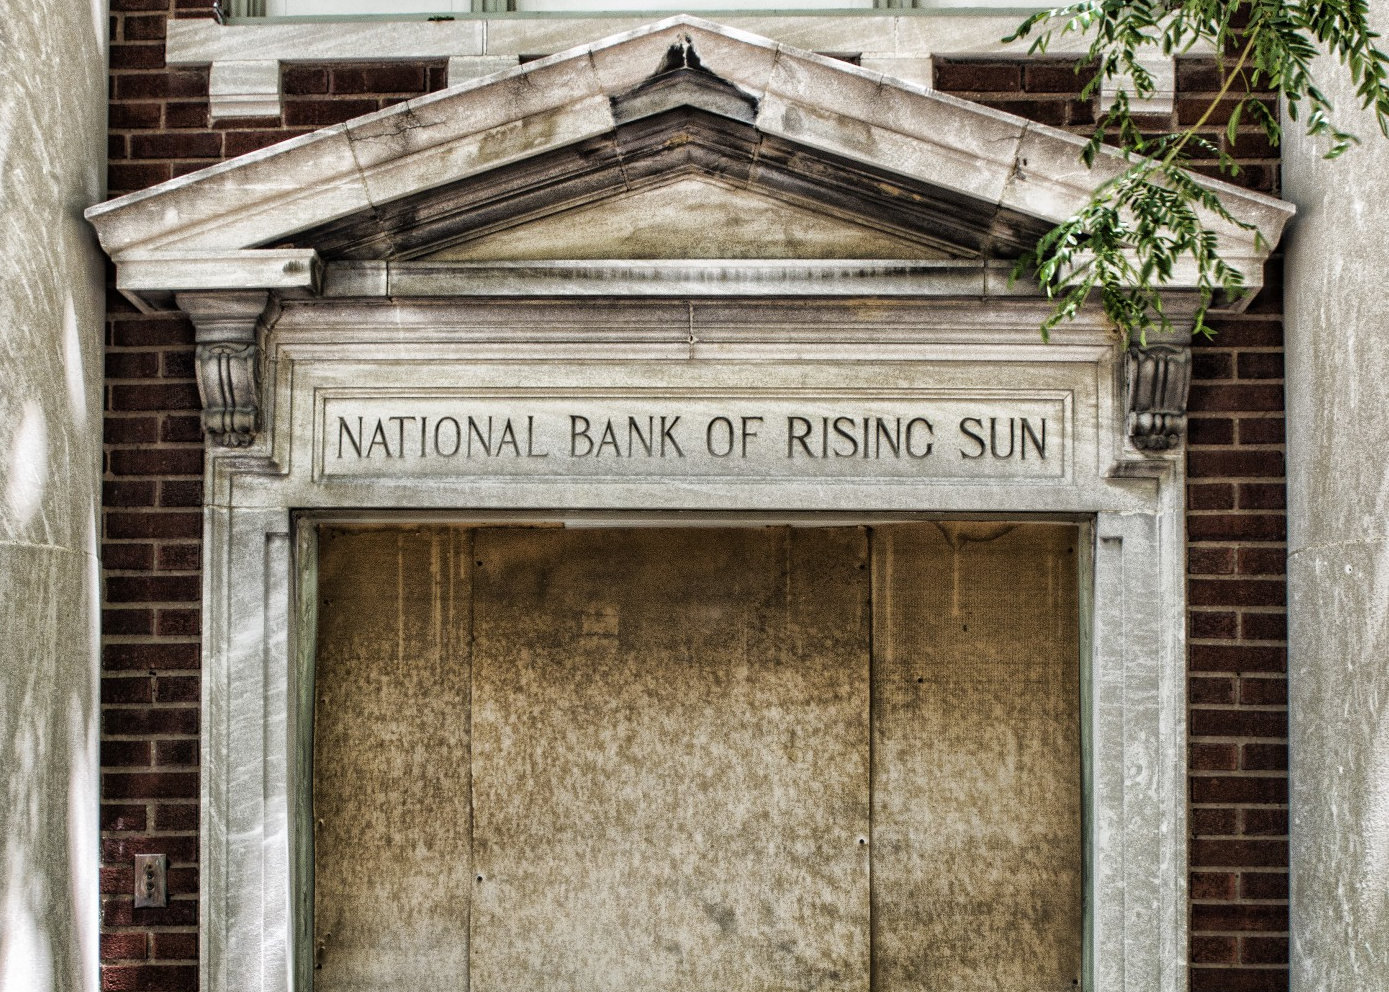 Closed bank in rural Indiana. Photo credit: CC0 Public Domain